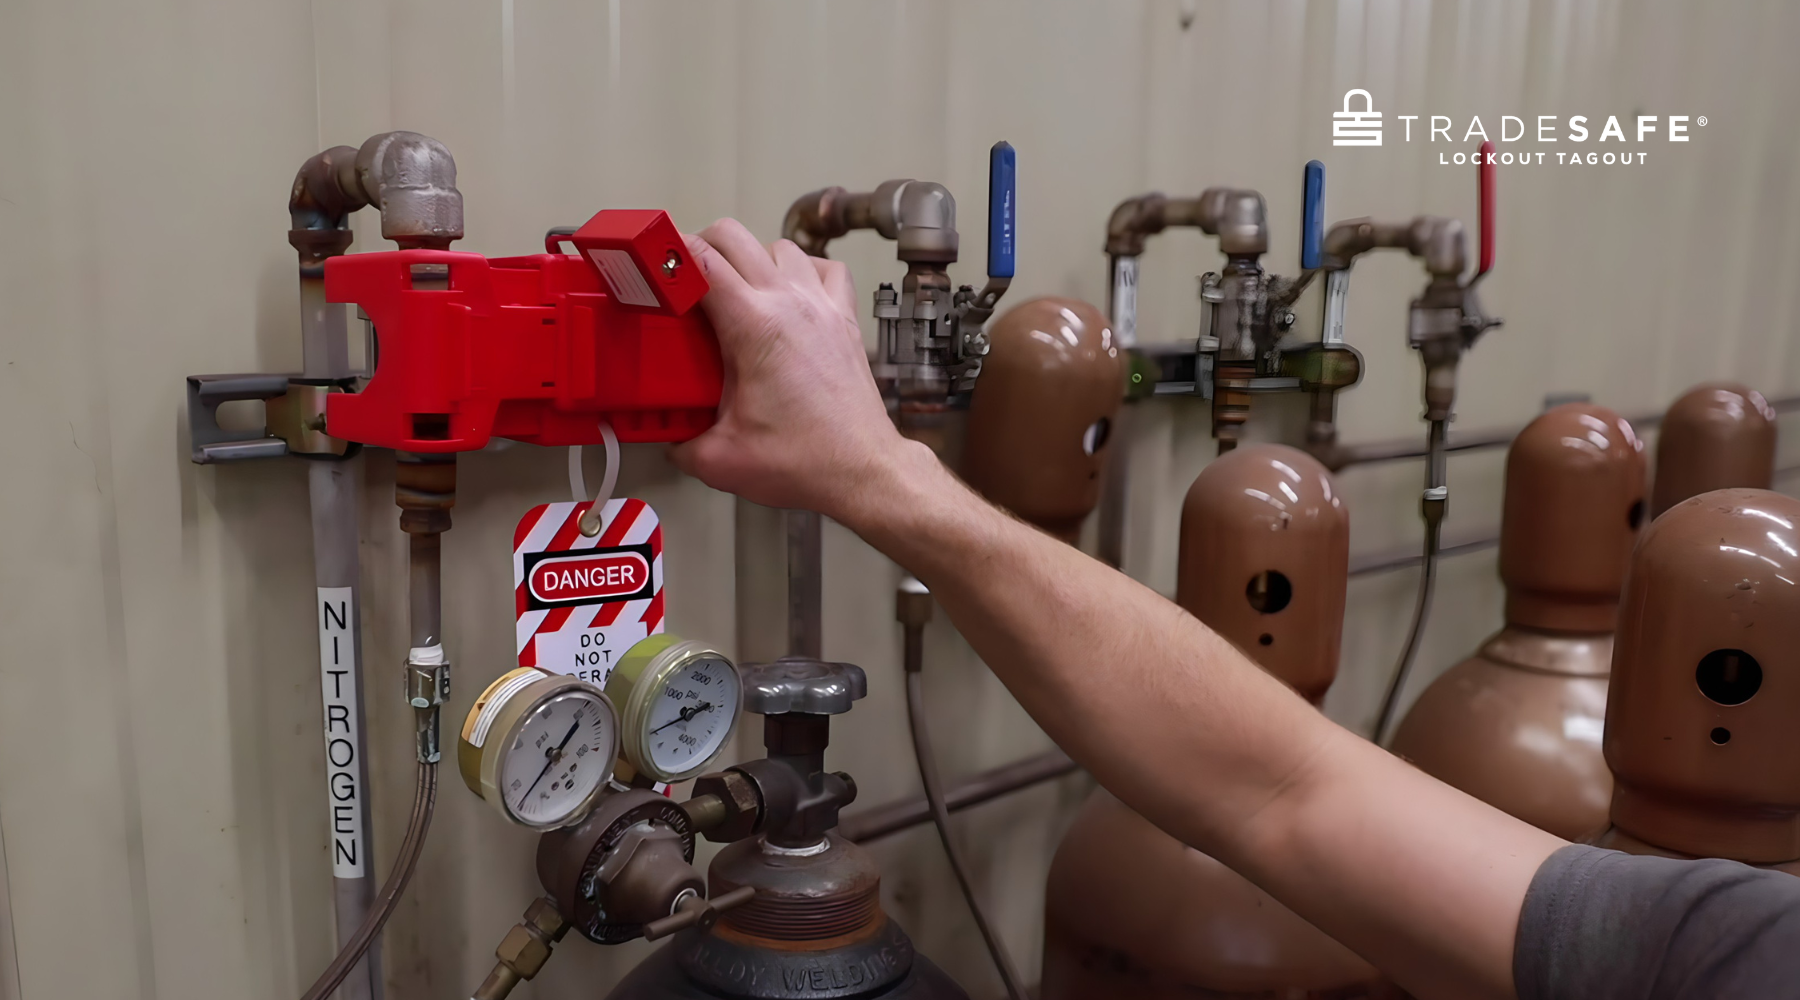 worker performing lockout tagout